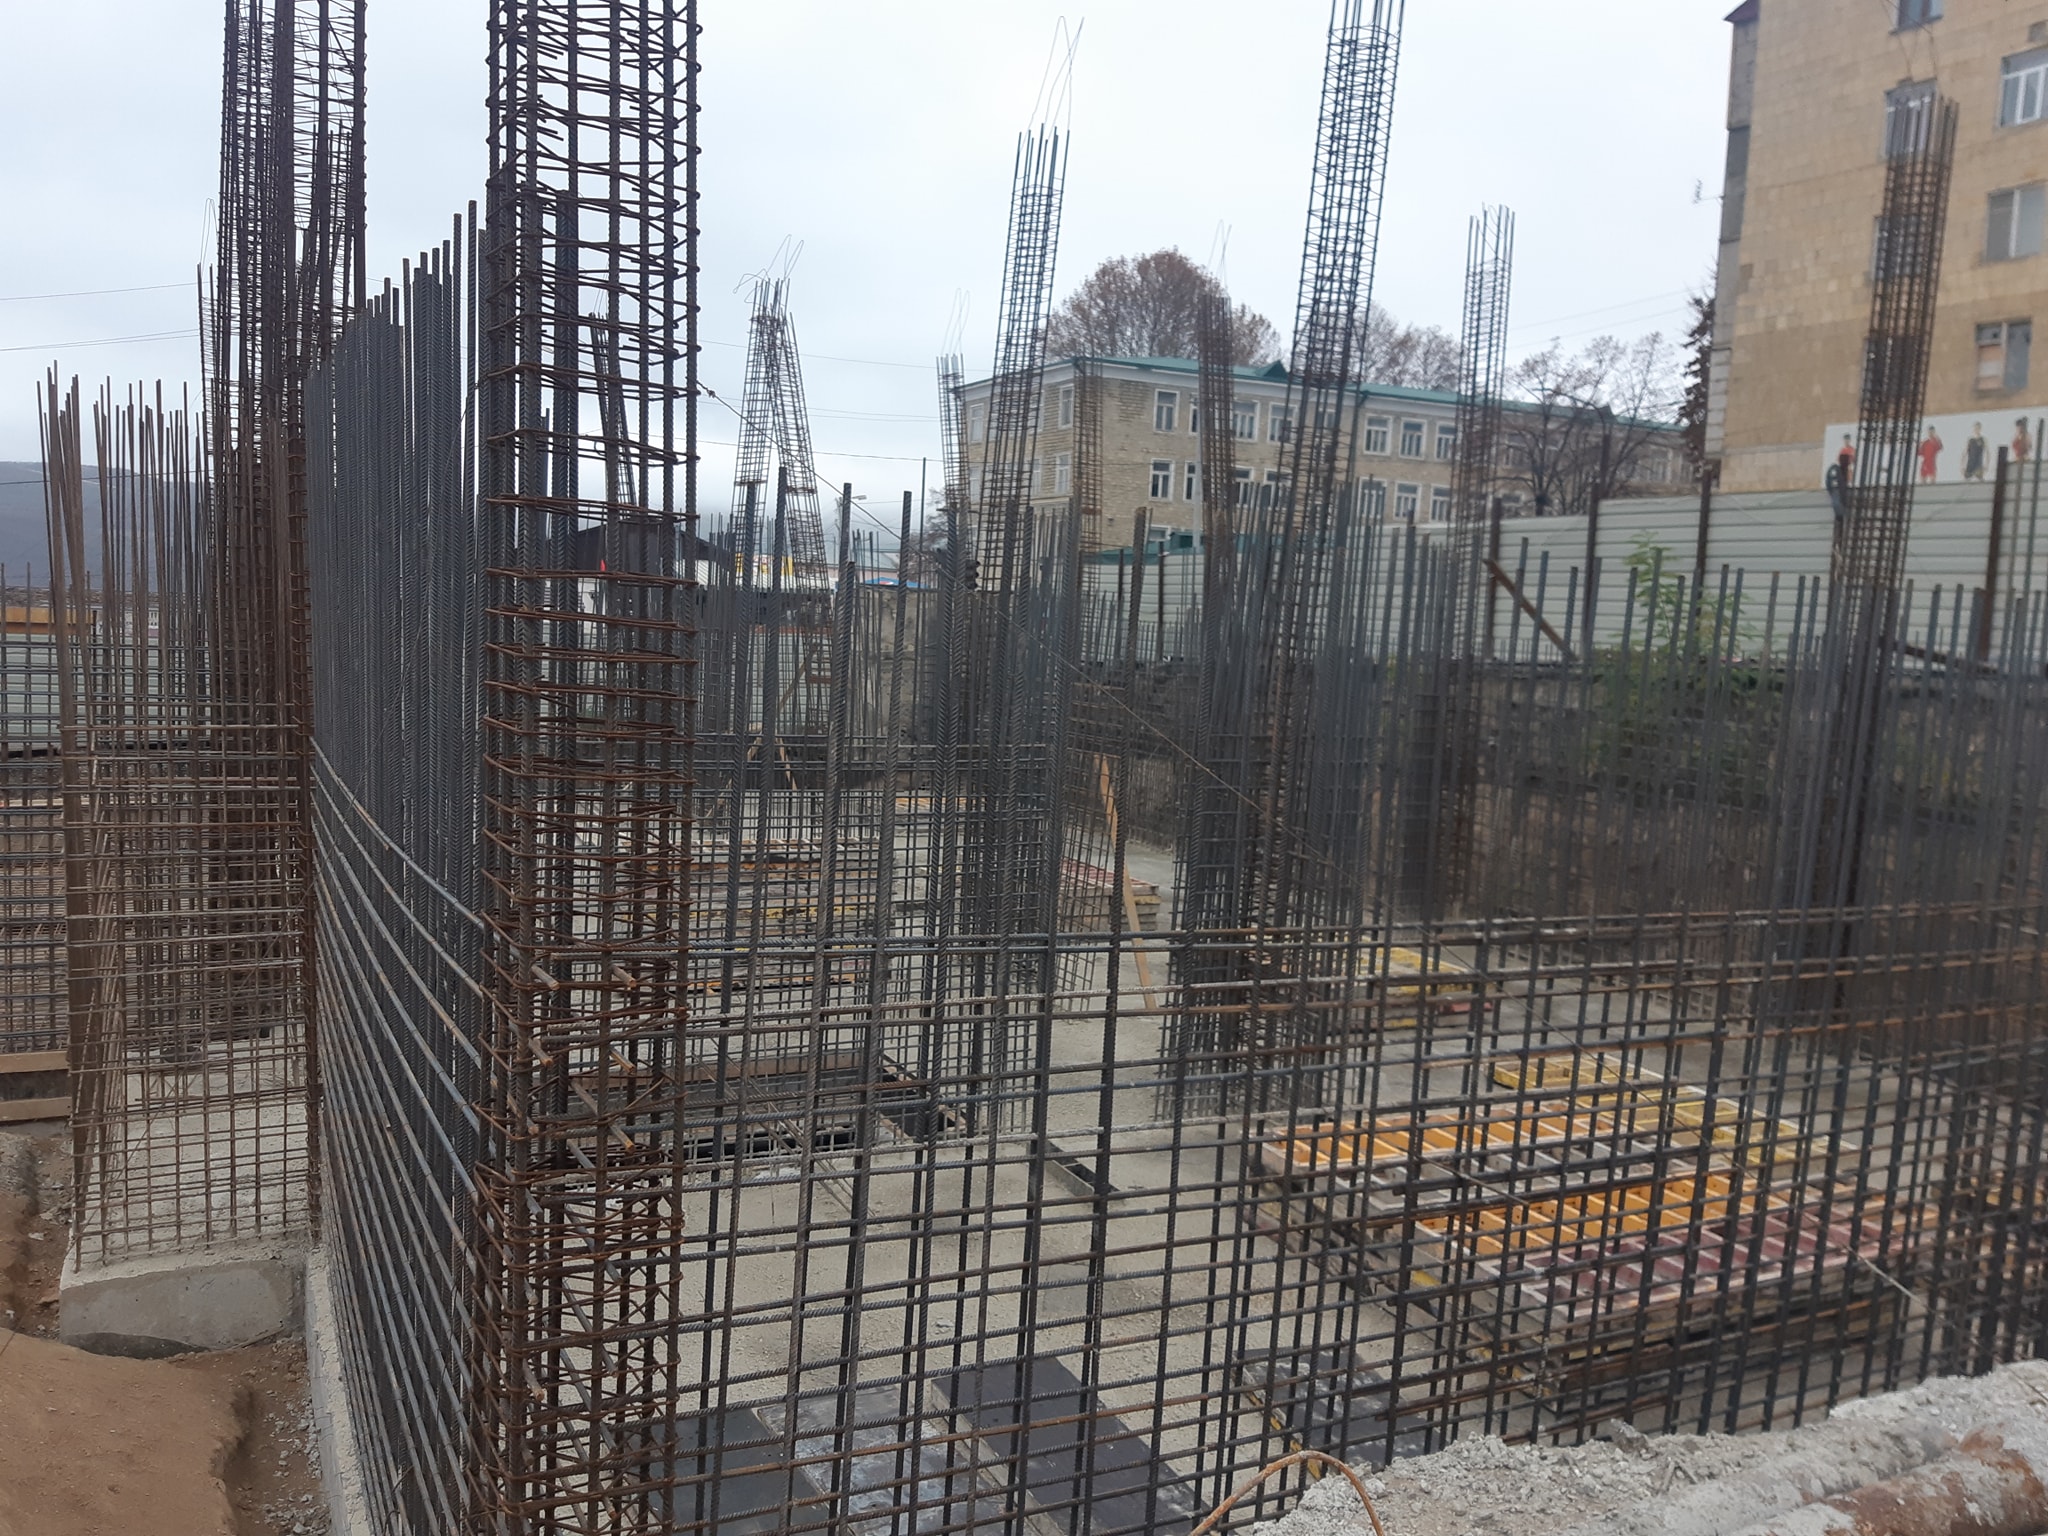 Construction of an apartment building on Stepanakert’s Mamikonyan Street continues